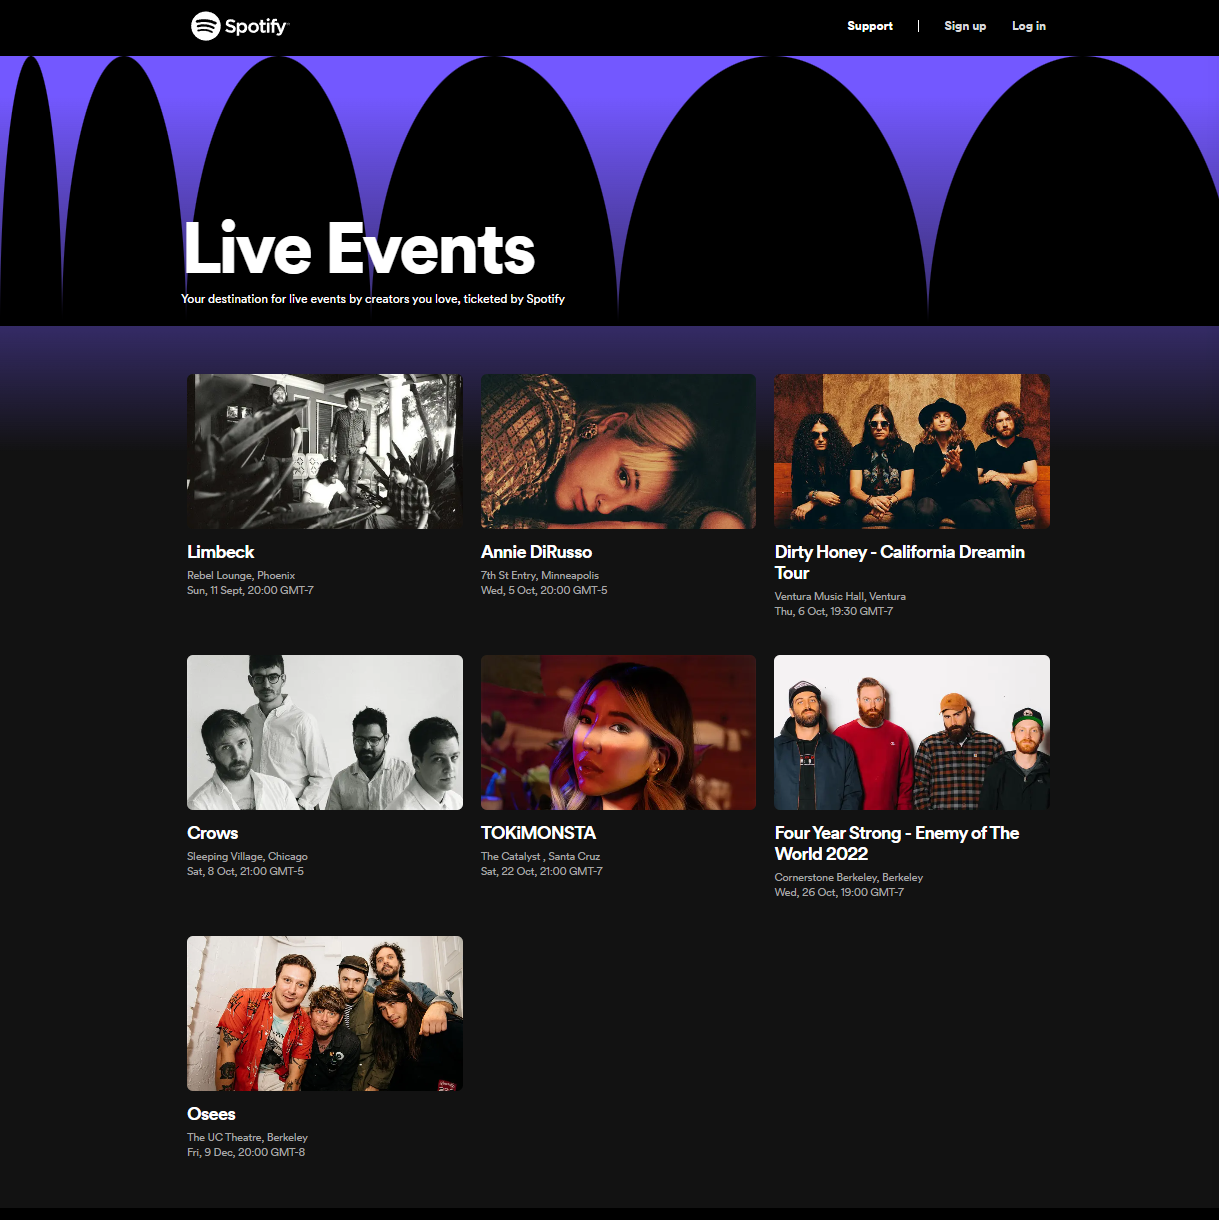 Spotify is now selling concert tickets. Interesting timing.